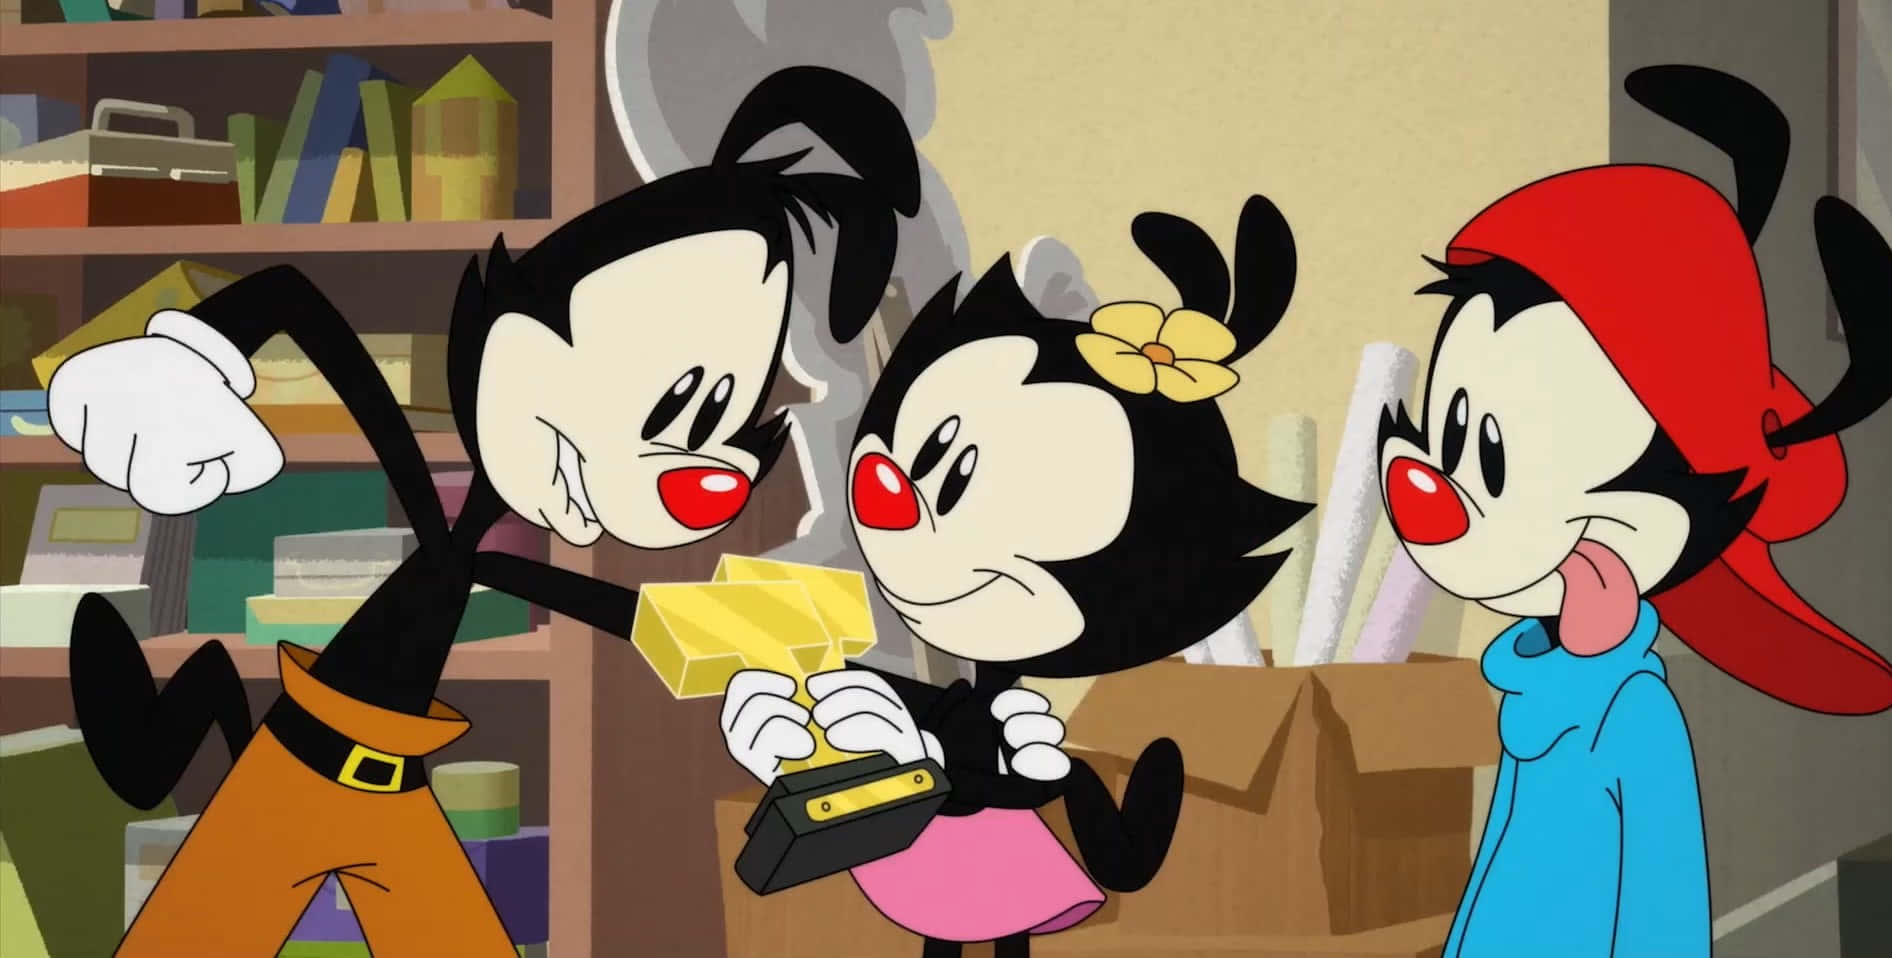 The Animaniacs radiate Joy and Laughter